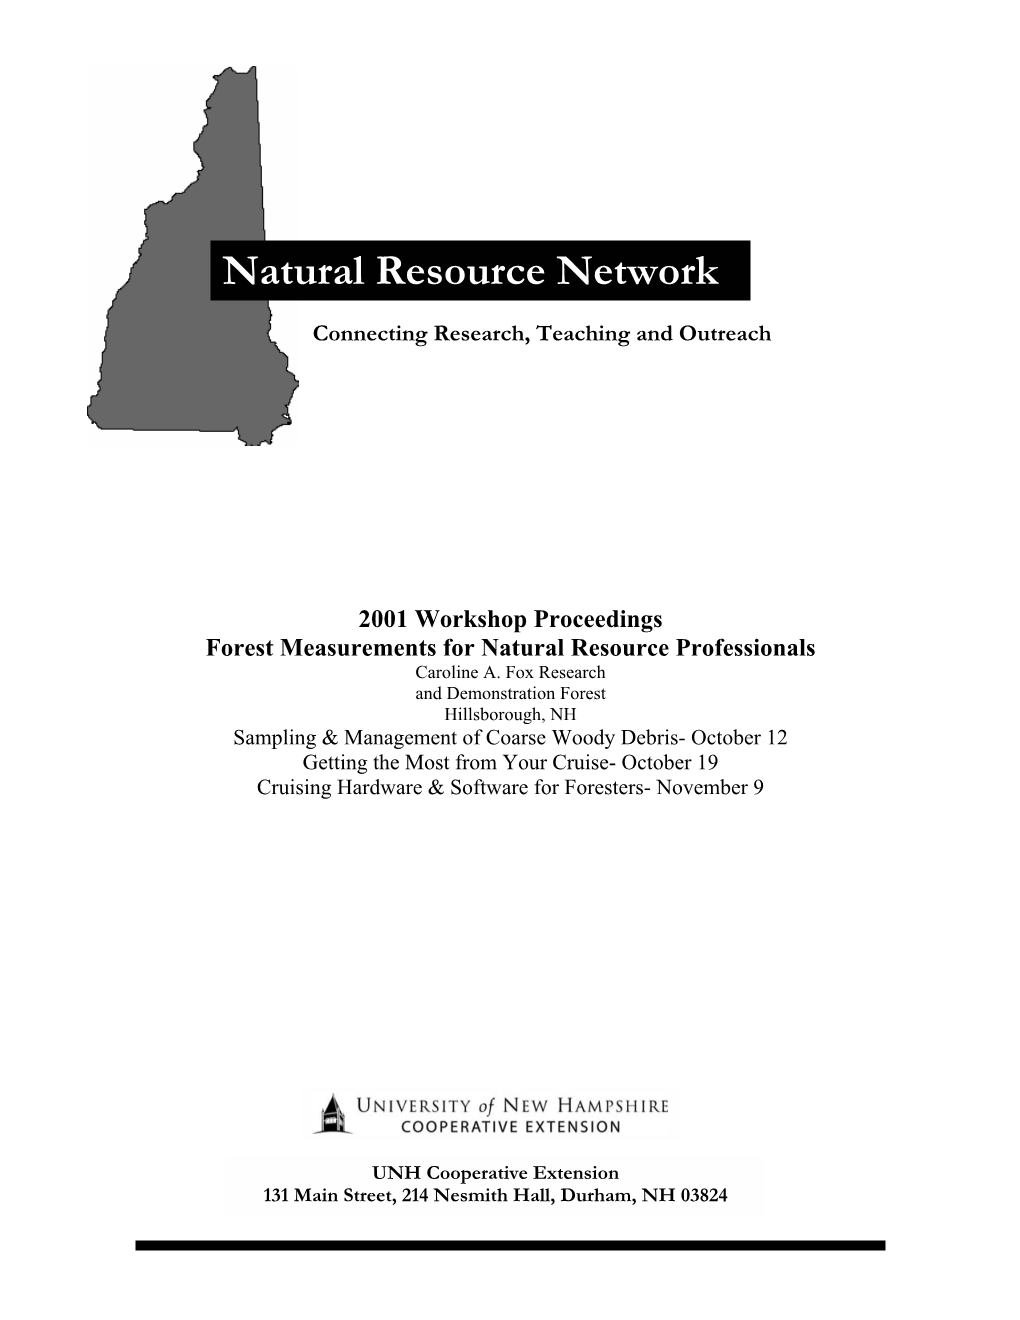 Forest Measurements for Natural Resource Professionals, 2001 Workshop Proceedings